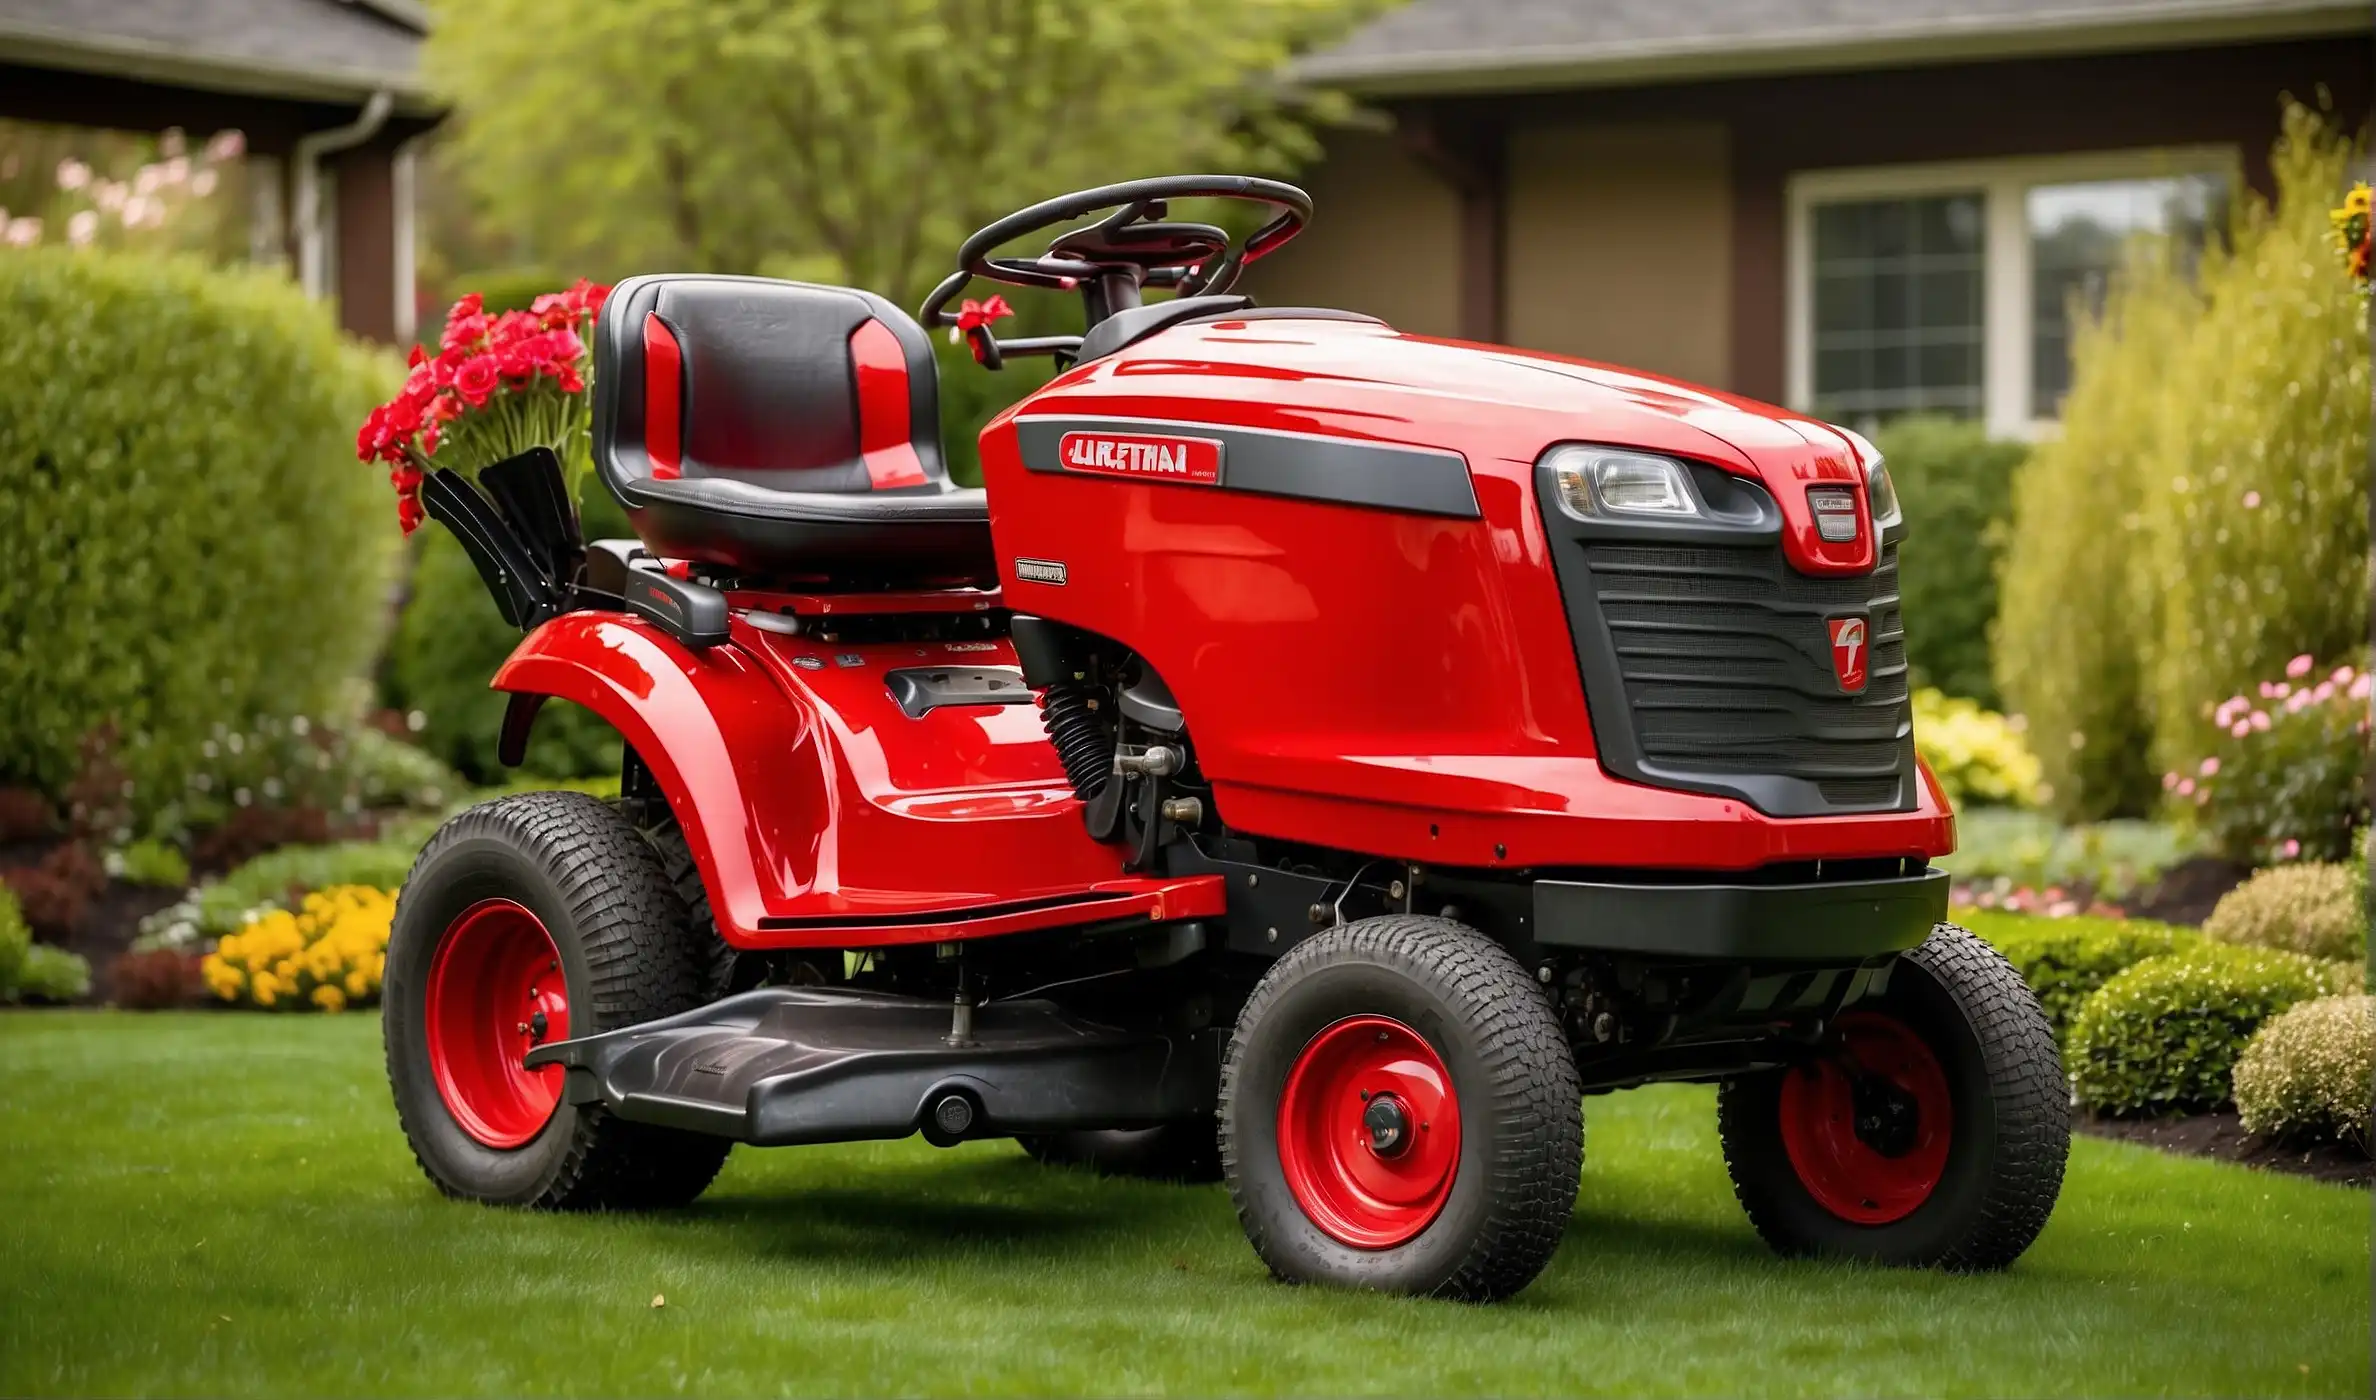 Craftsman T2300: A Detailed Look at Features & Benefits